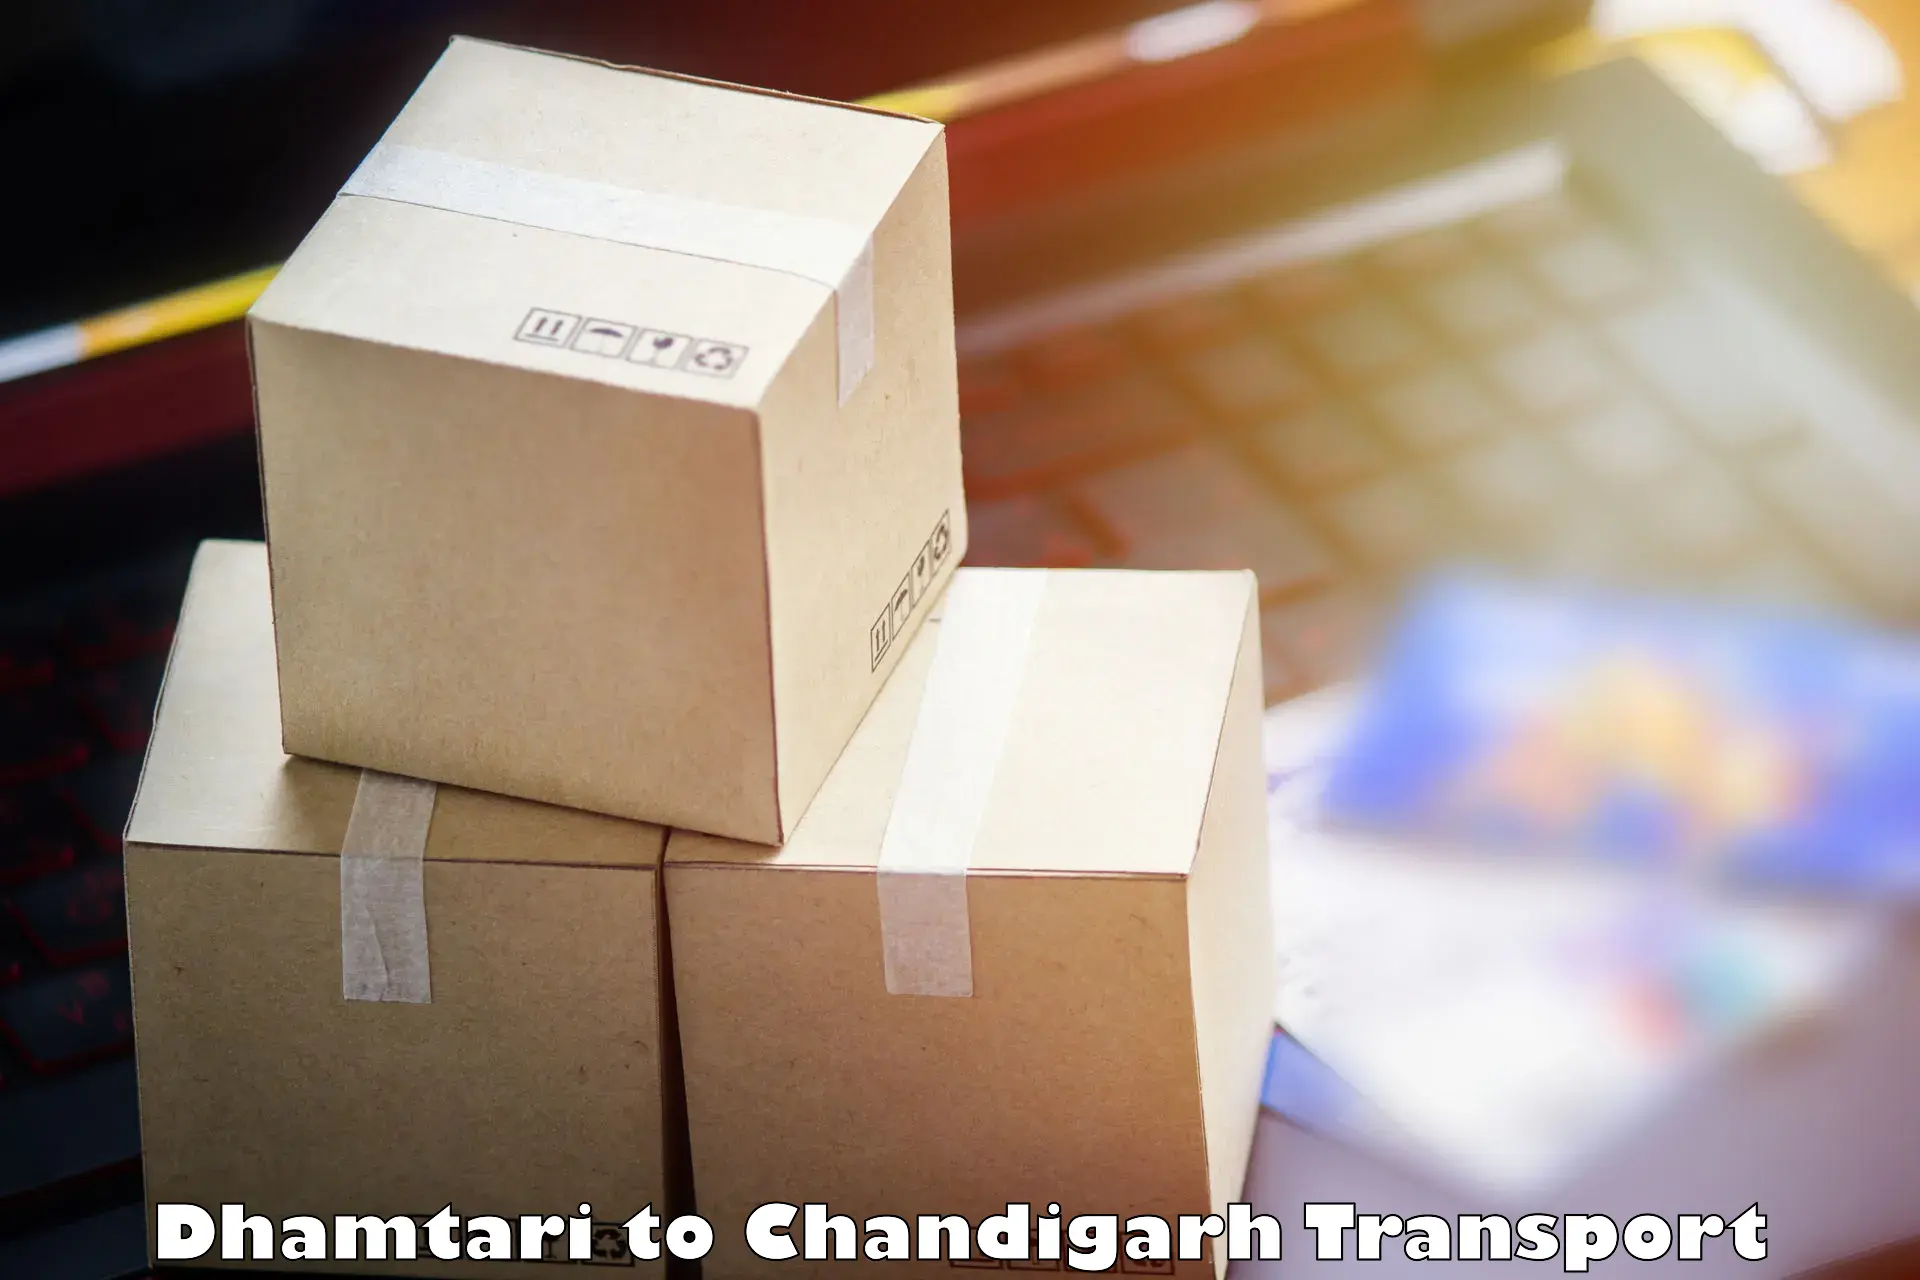 Parcel transport services Dhamtari to Chandigarh